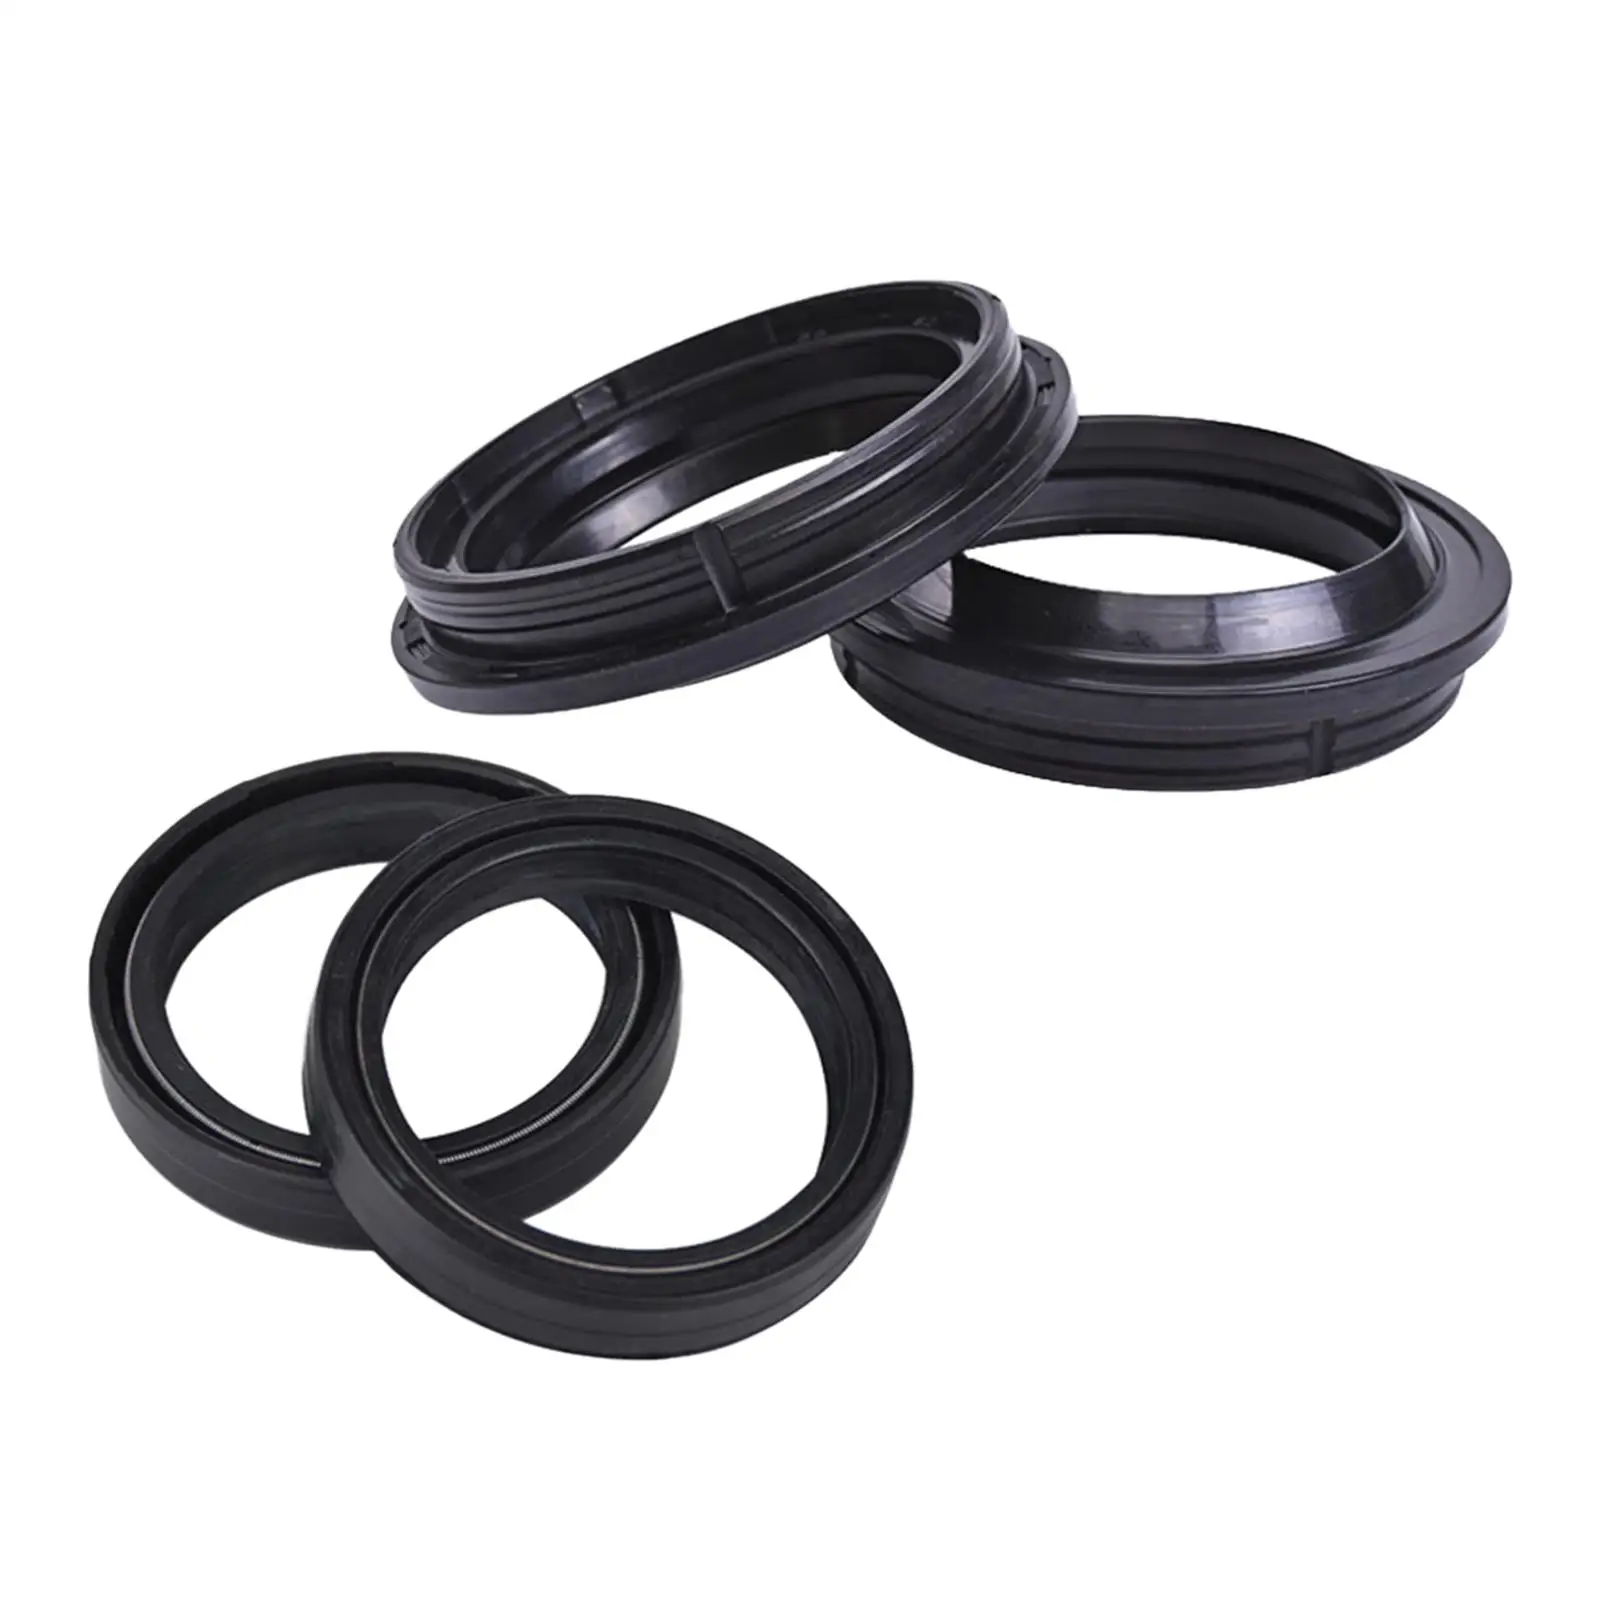 Motorcycle Front Fork Oil Seal and Dust Seal Kit for Ducati Hypermotard